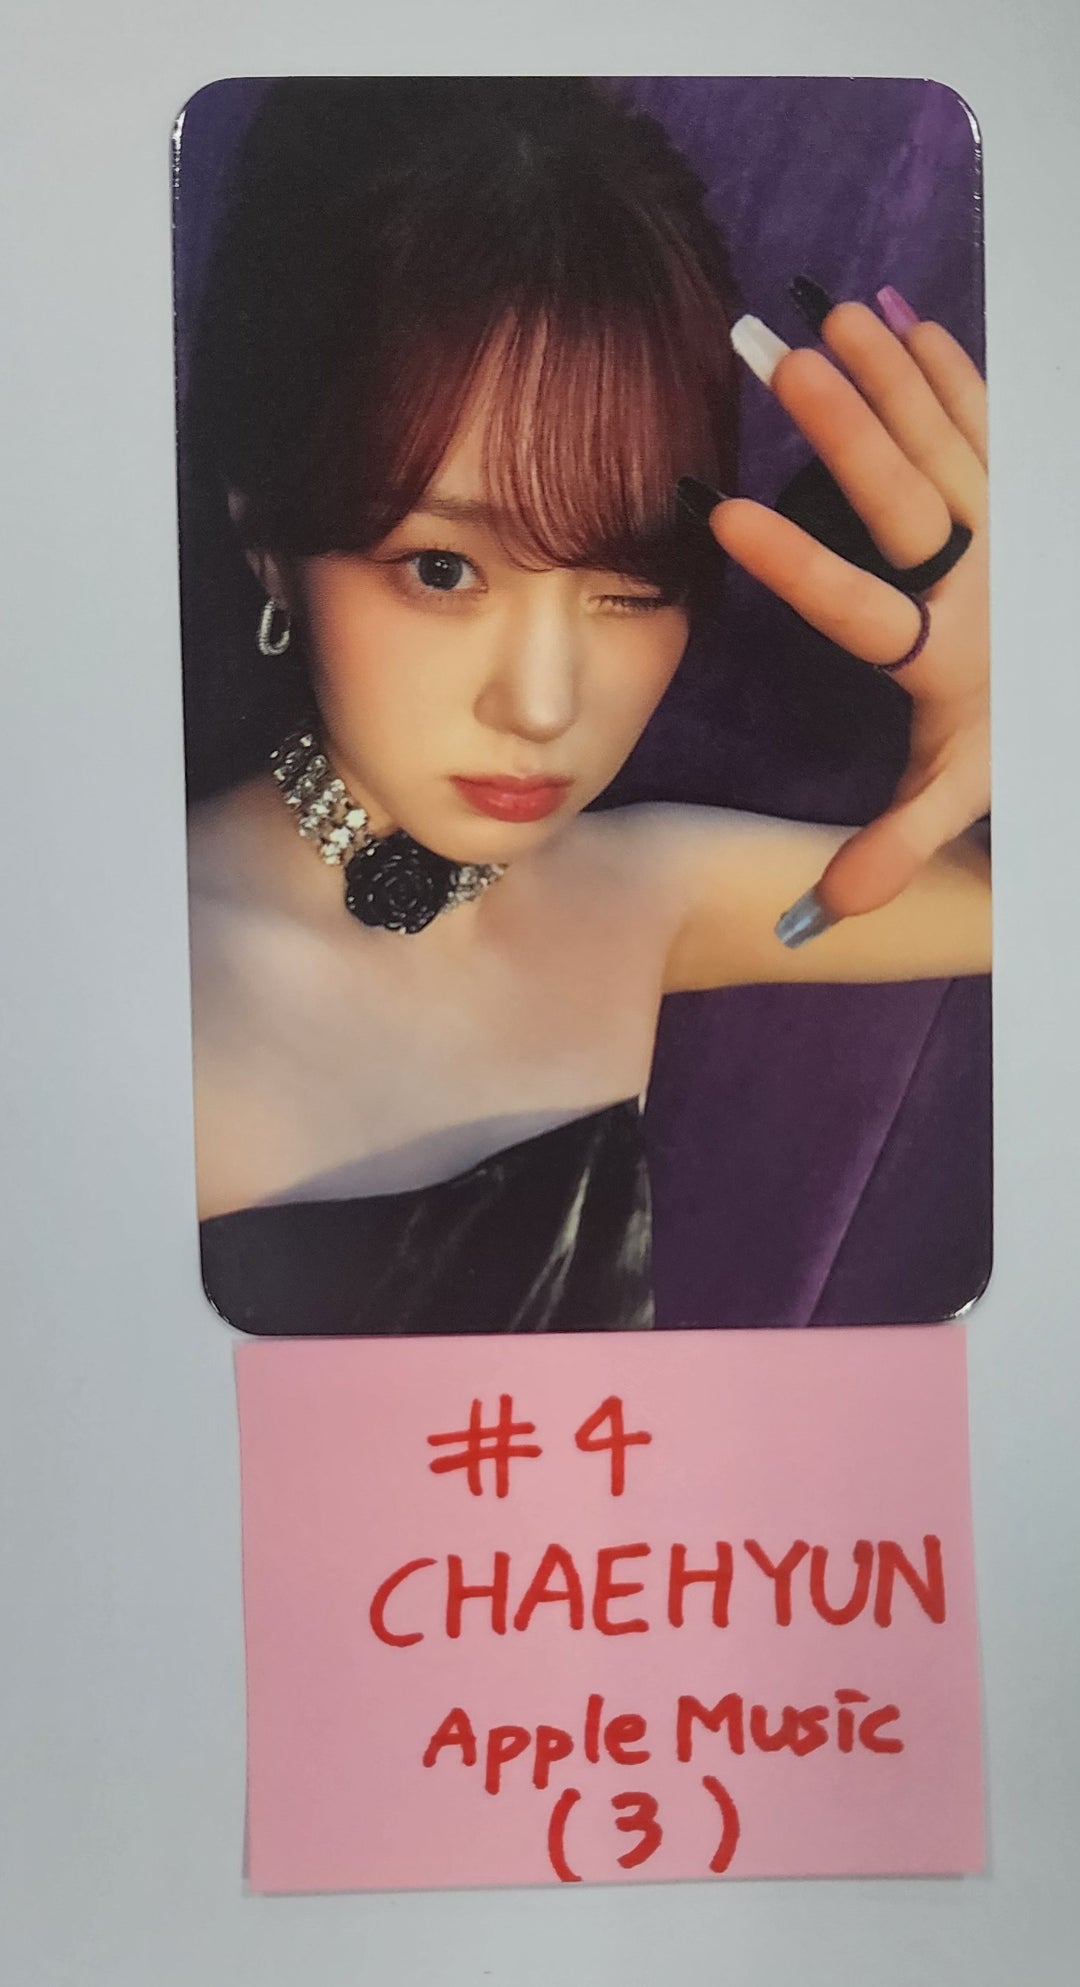 Kep1er "Kep1going On" - Apple Music Fansign Event Photocard [24.6.12]